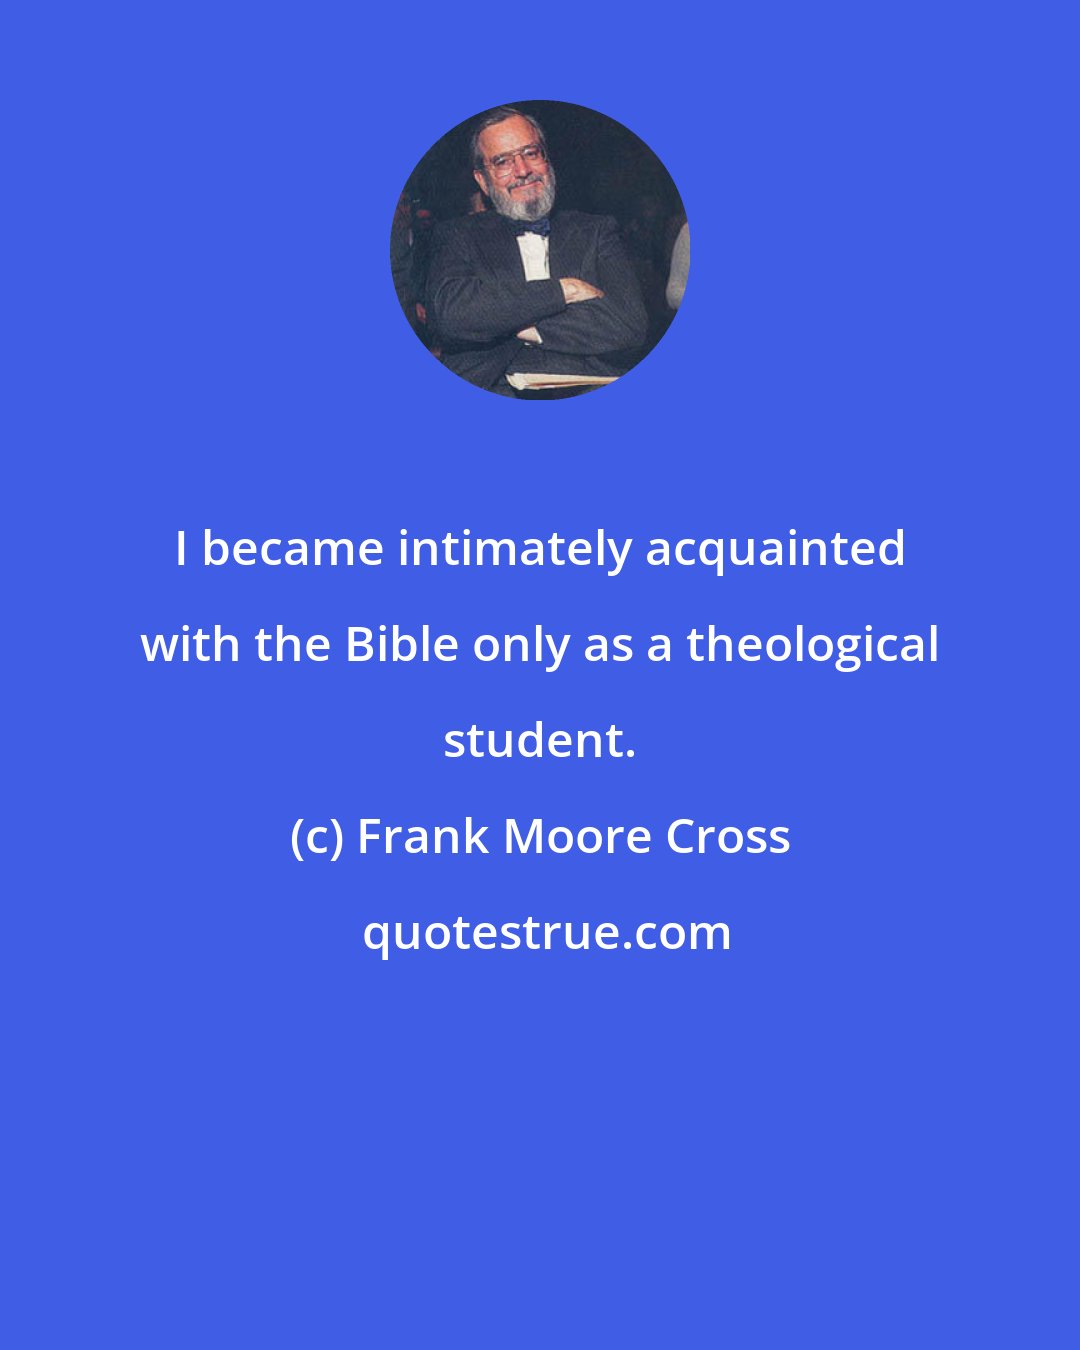 Frank Moore Cross: I became intimately acquainted with the Bible only as a theological student.